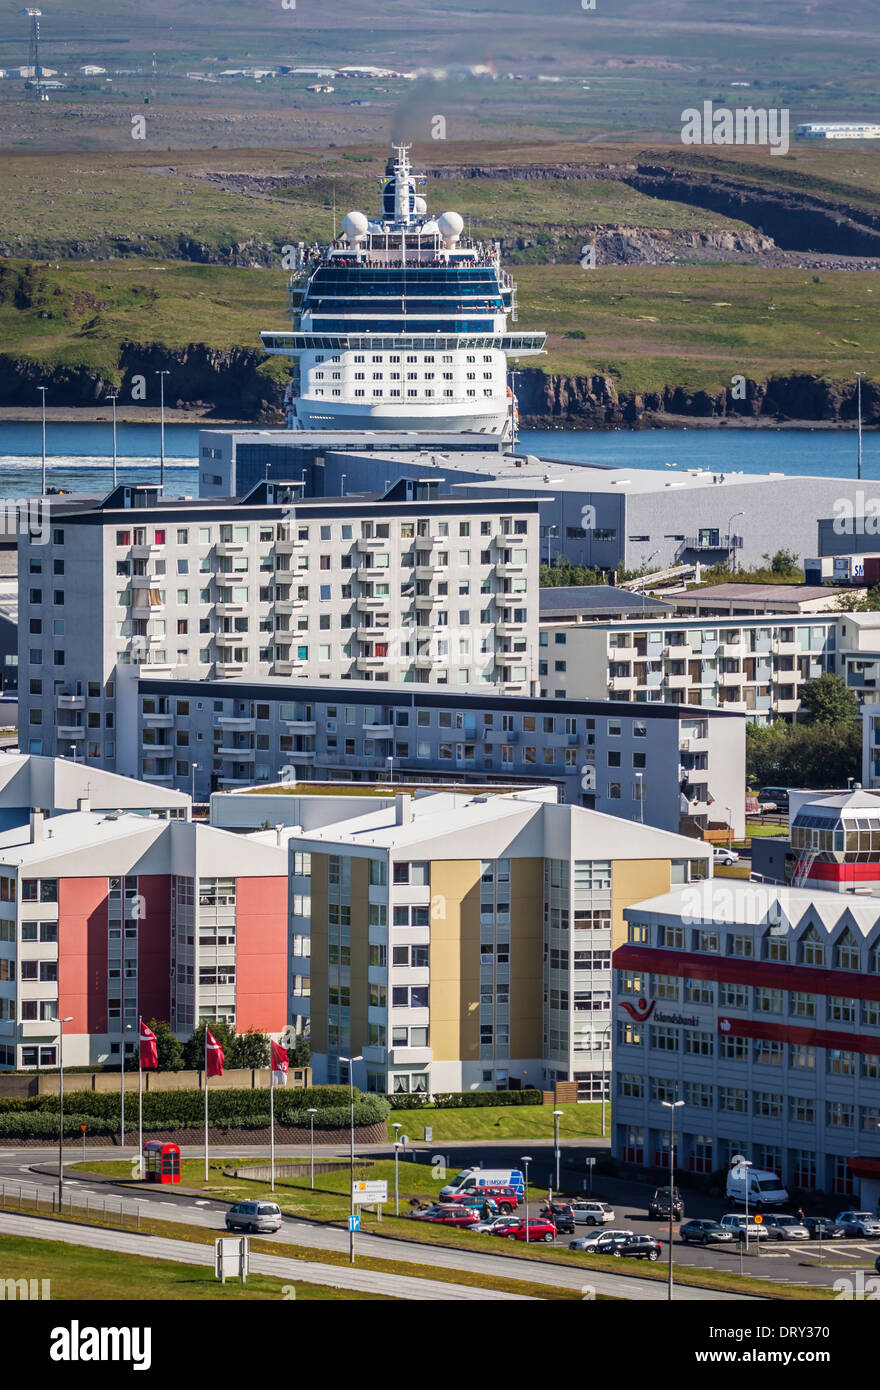 Apartment buildings with a large cruise ship in the harbor, Reykjavik, Iceland Stock Photo